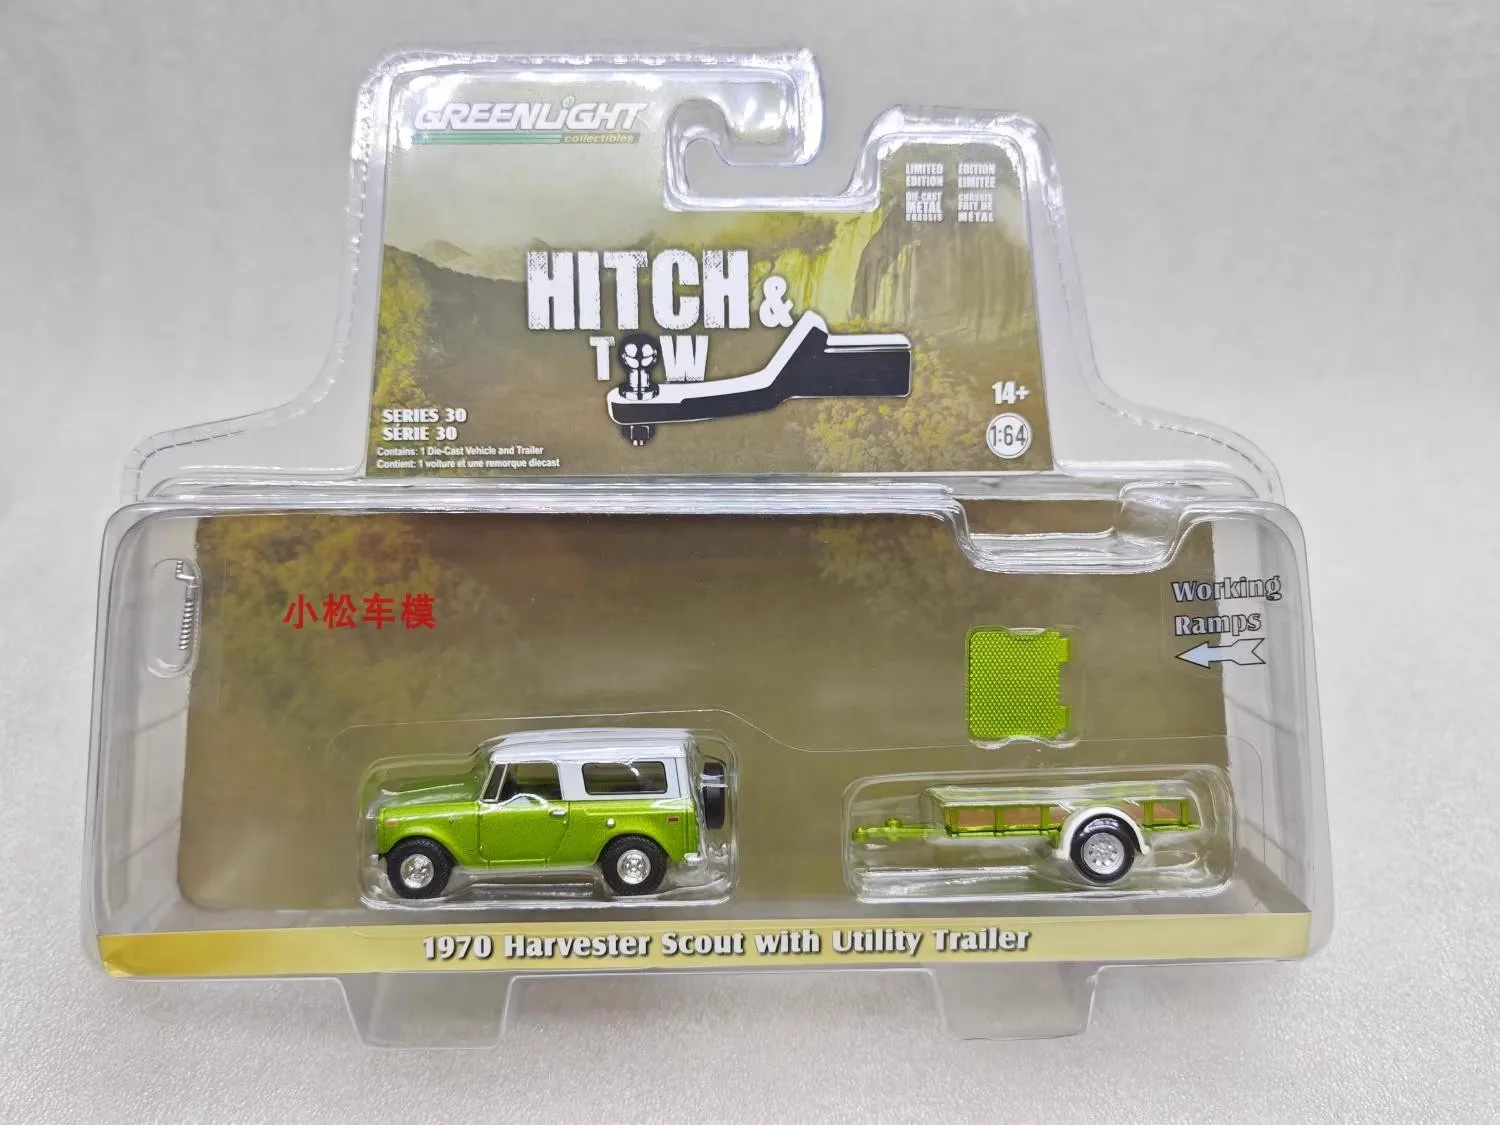 

1:64 Hitch & Tow 30 - 1970 Harvester Scout with Utility Trailer Diecast Metal Alloy Model Car Toys For Gift Collection